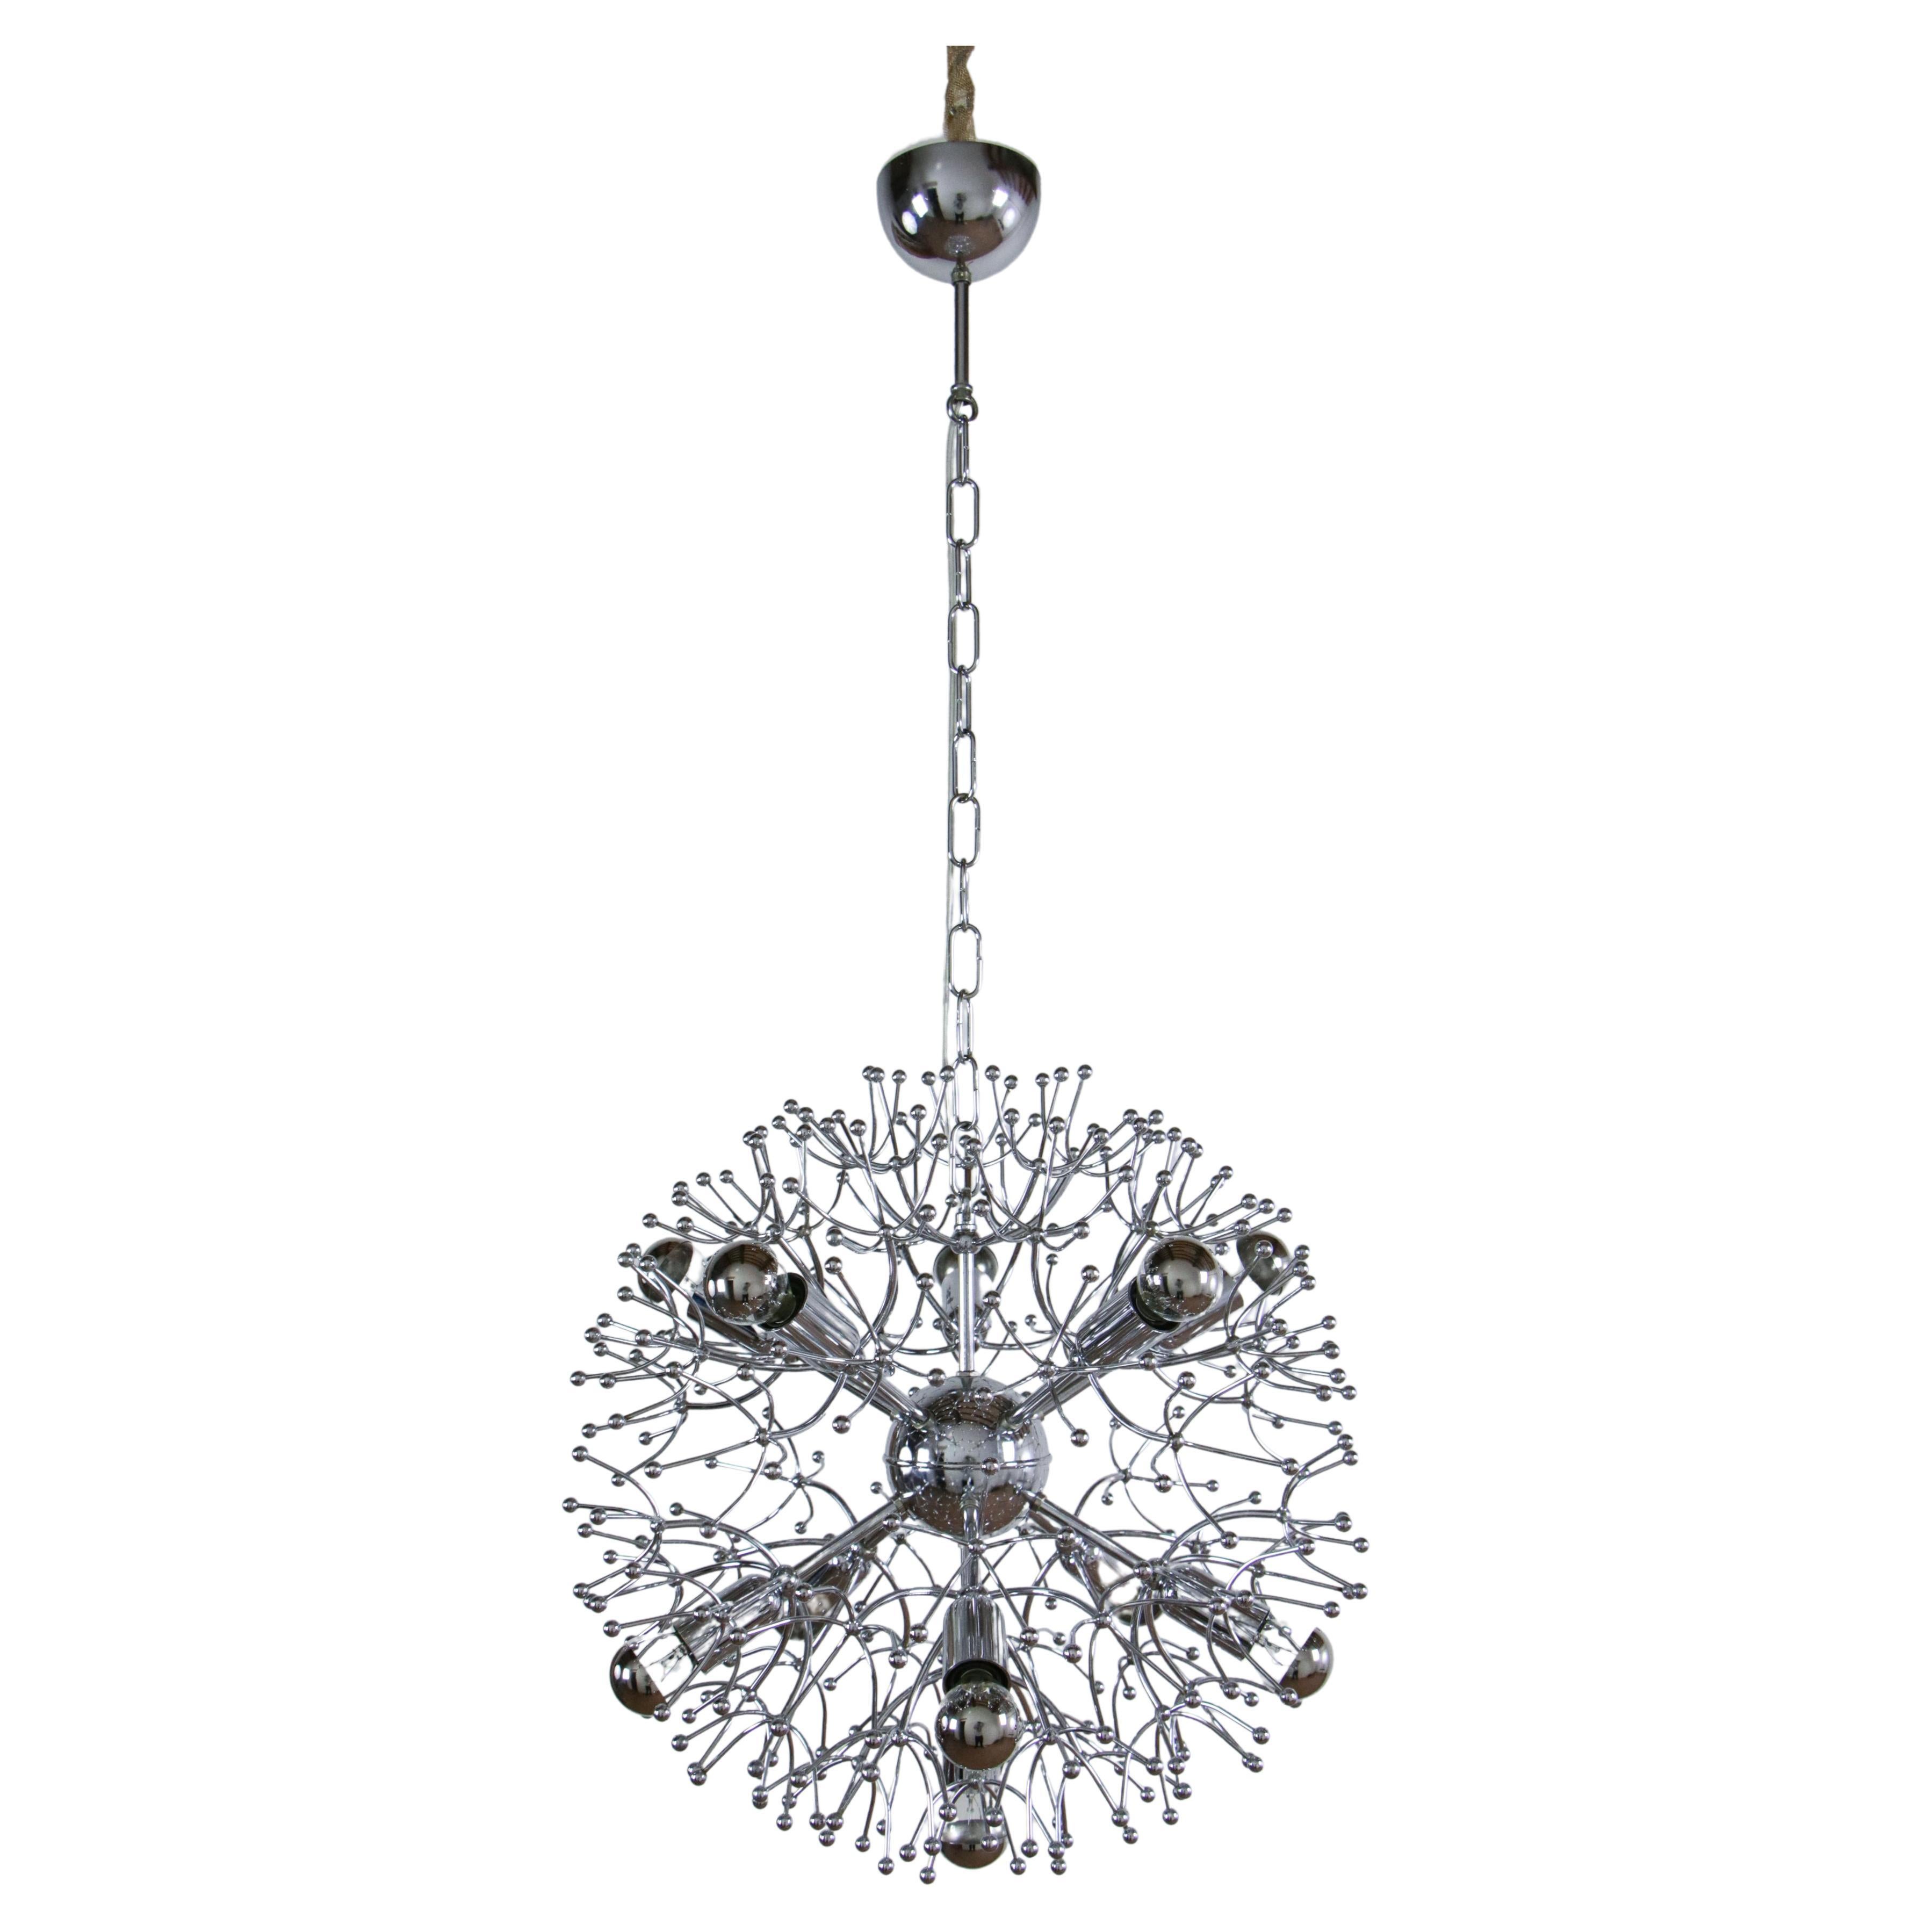 A magnificent Italian space-age chrome sputnik chandelier by Gaetano Sciolari, chrome brass, 11 lights E14 format. From the Space Age period of the 1970s, this piece has a profound decorative impact. It was designed by Gaetano Sciolari. We recommend